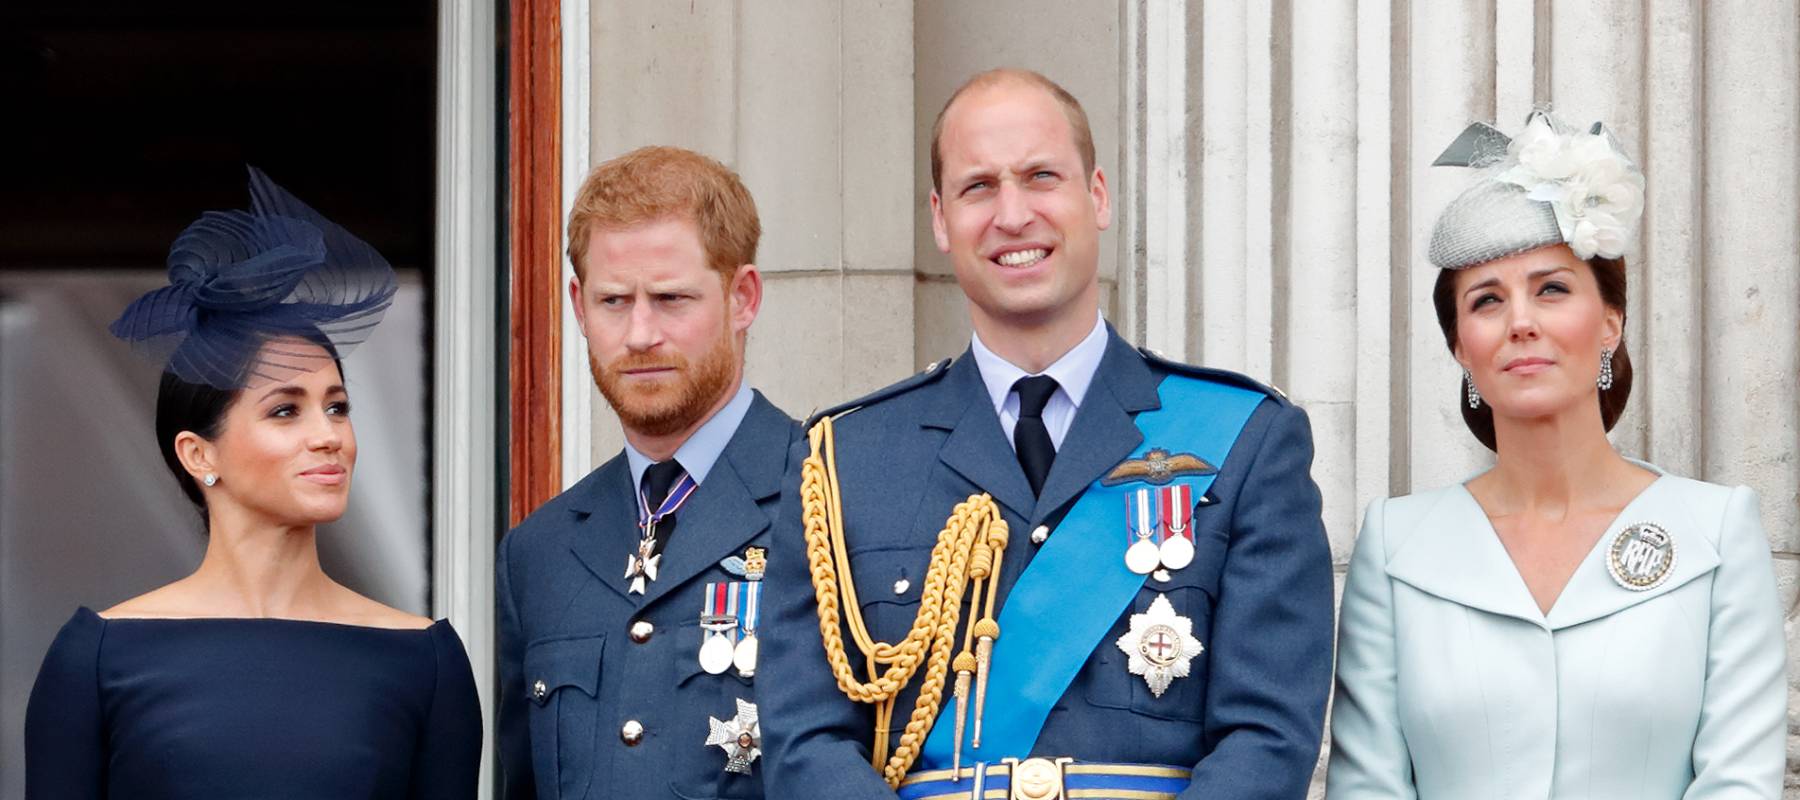 Prince Harry and Megan stand beside Prince William and Kate during a Buckingham Palace event, July 2018